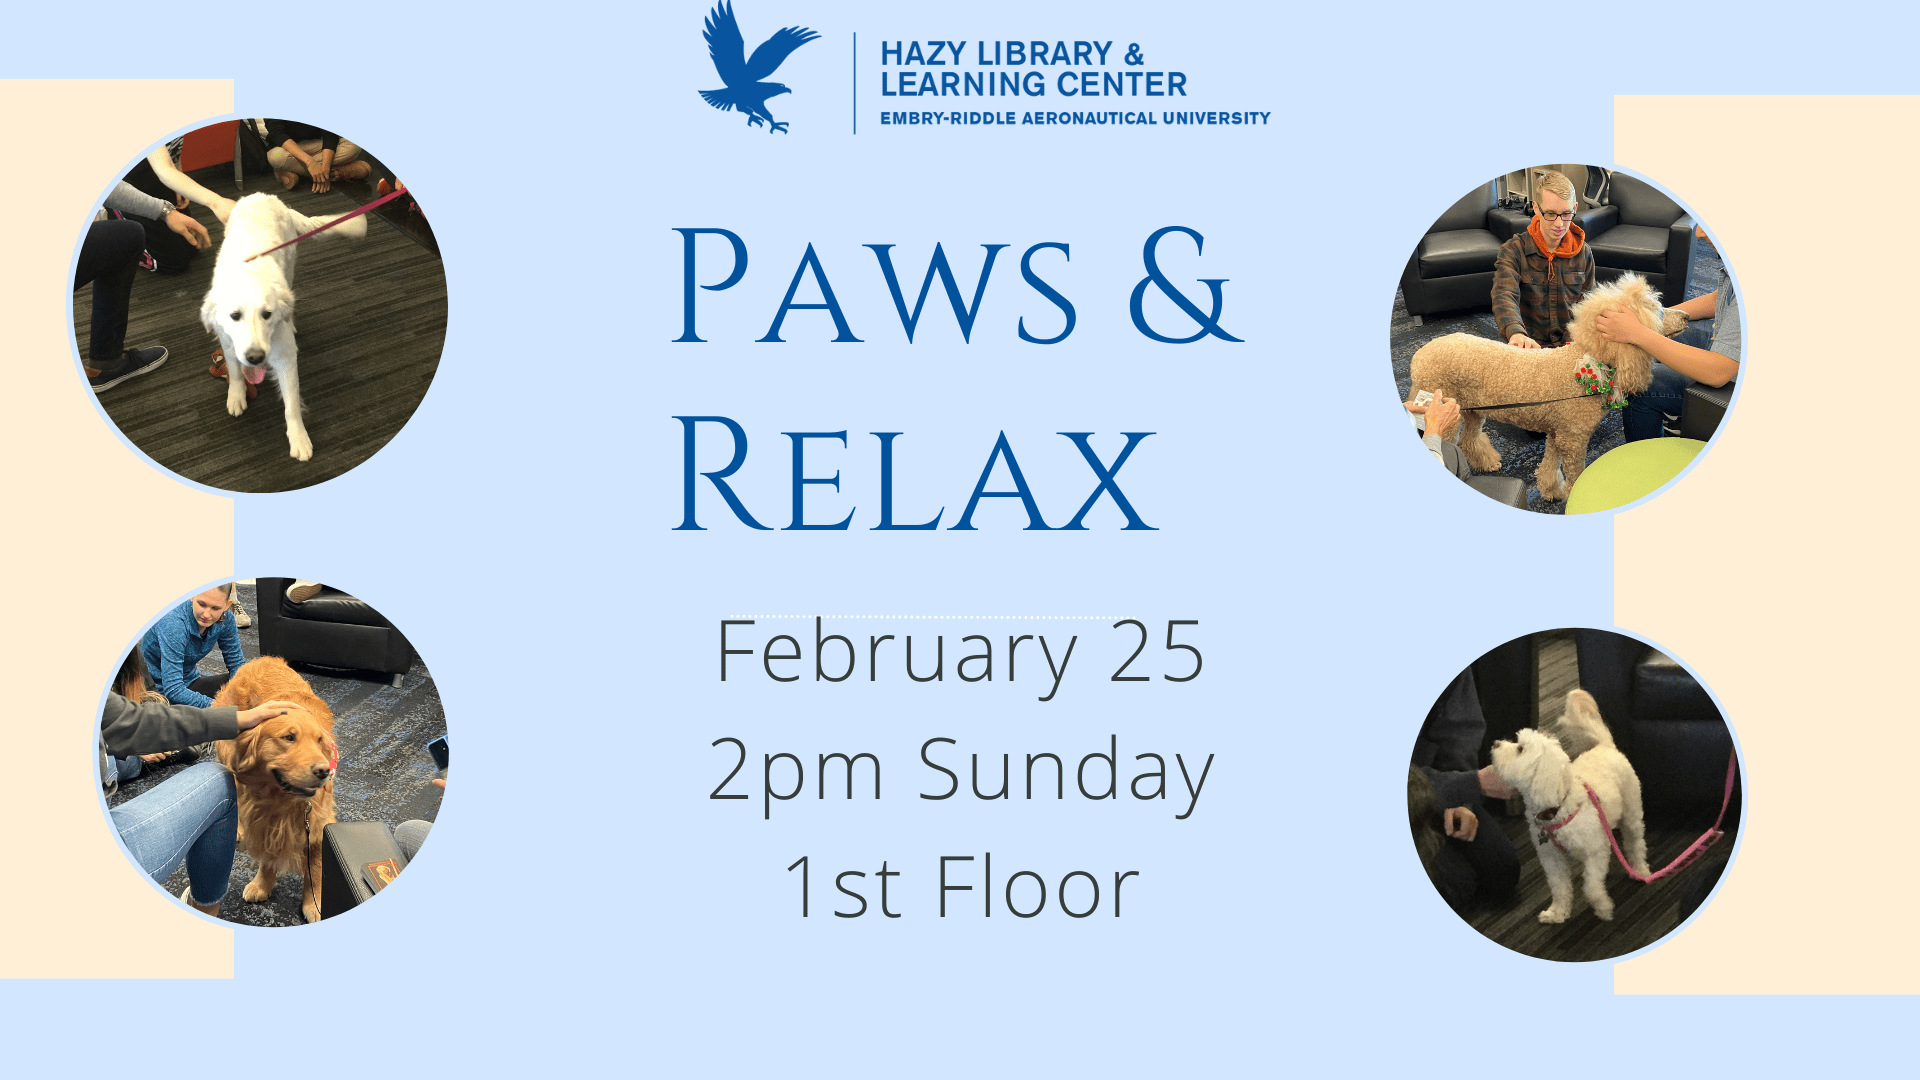 Pictures of Service dogs with Text about Paws and Relax on Feb 25th - @ 2pm